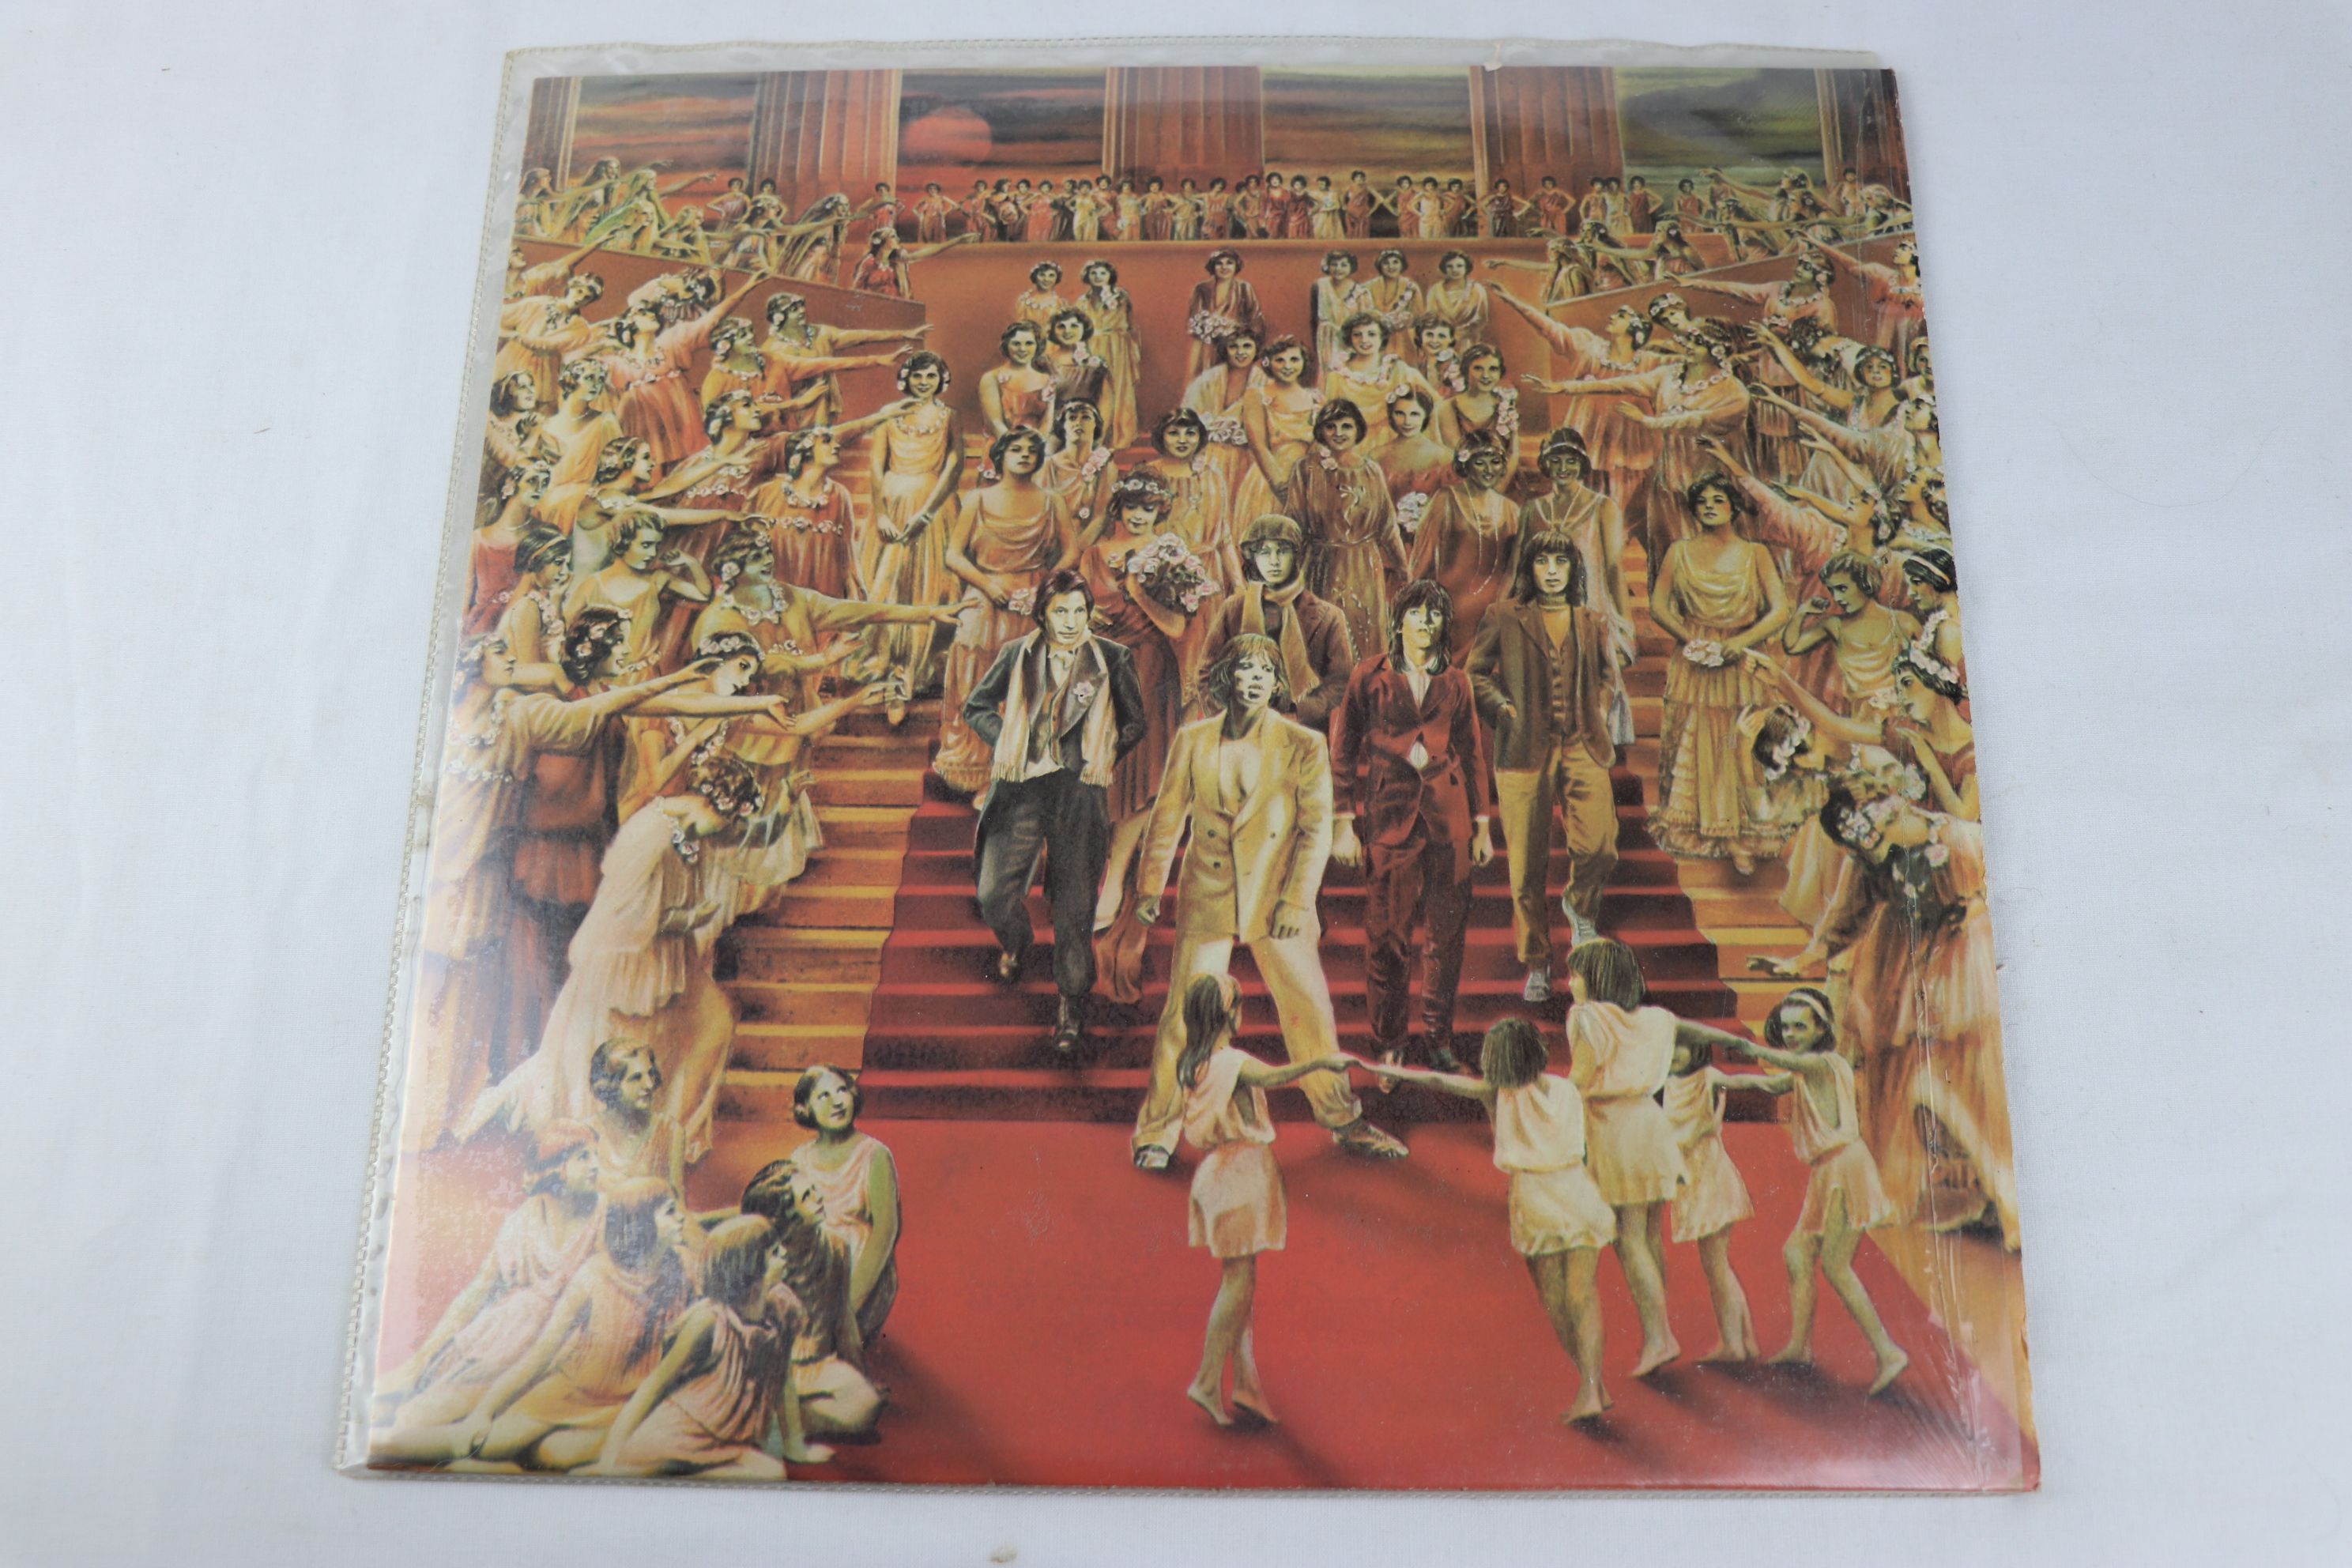 Vinyl - Five The Rolling Stones LPs plus a pink coloured Miss You 12", LPs include Rolled Gold, - Image 7 of 7